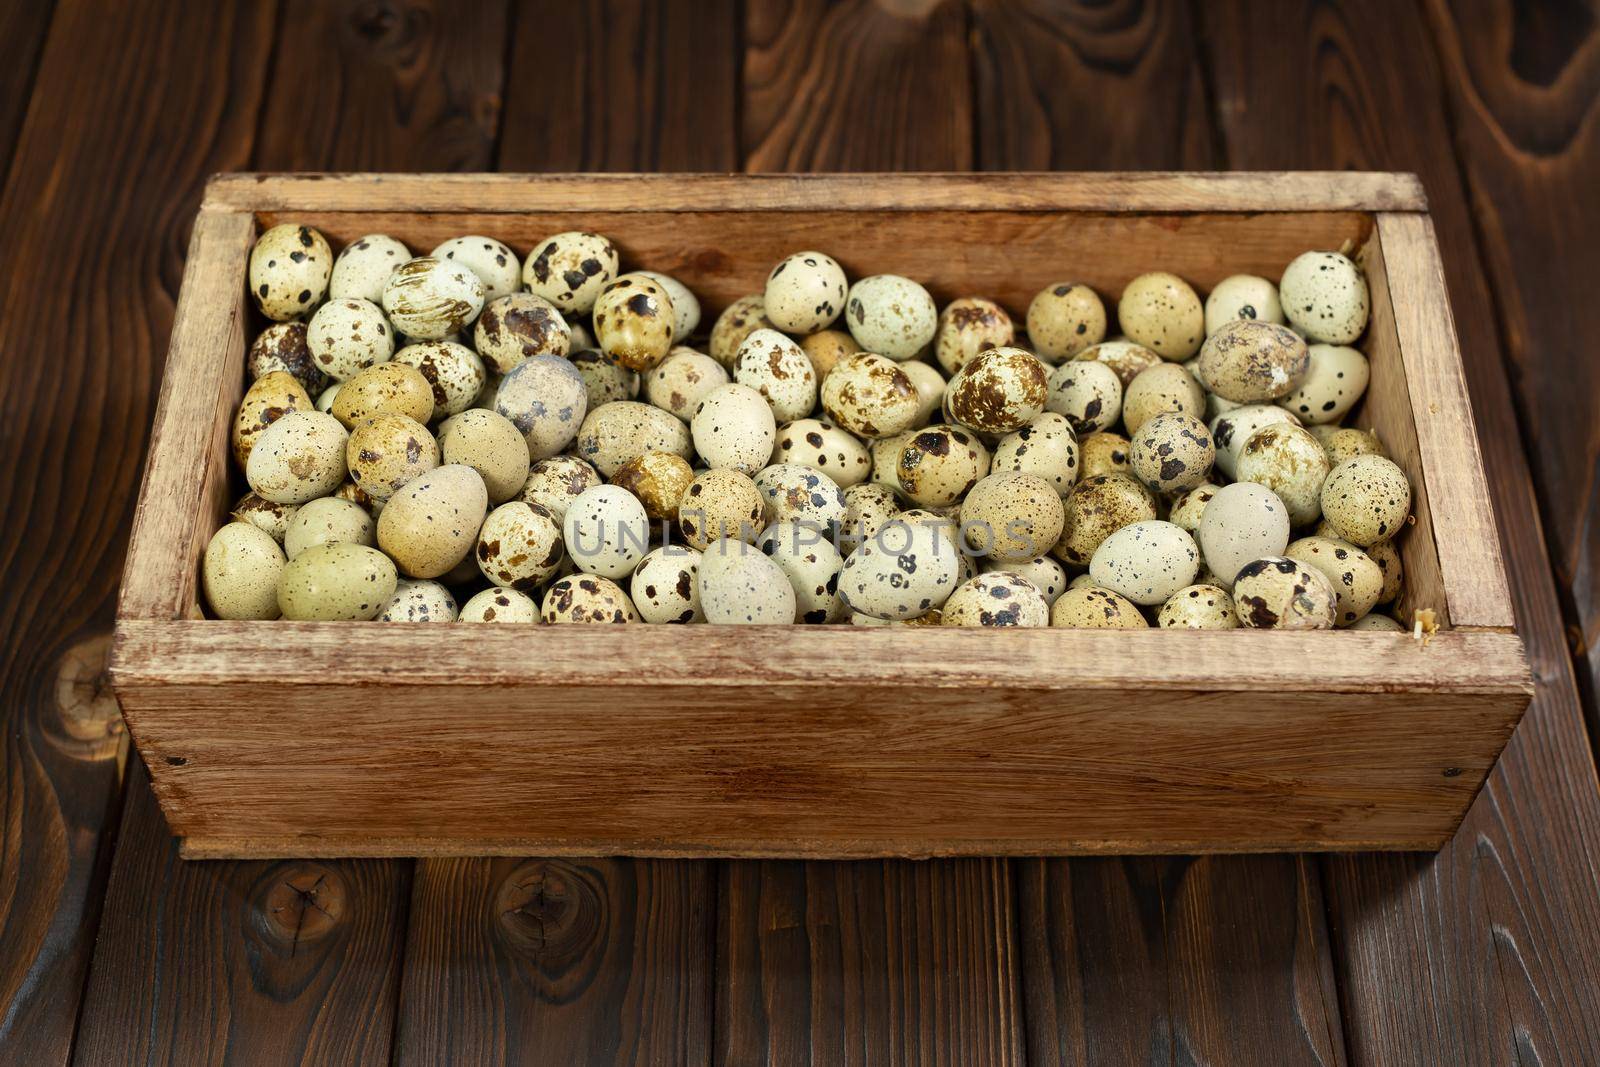 Lots of quail eggs in a wooden box on the background. by StudioPeace